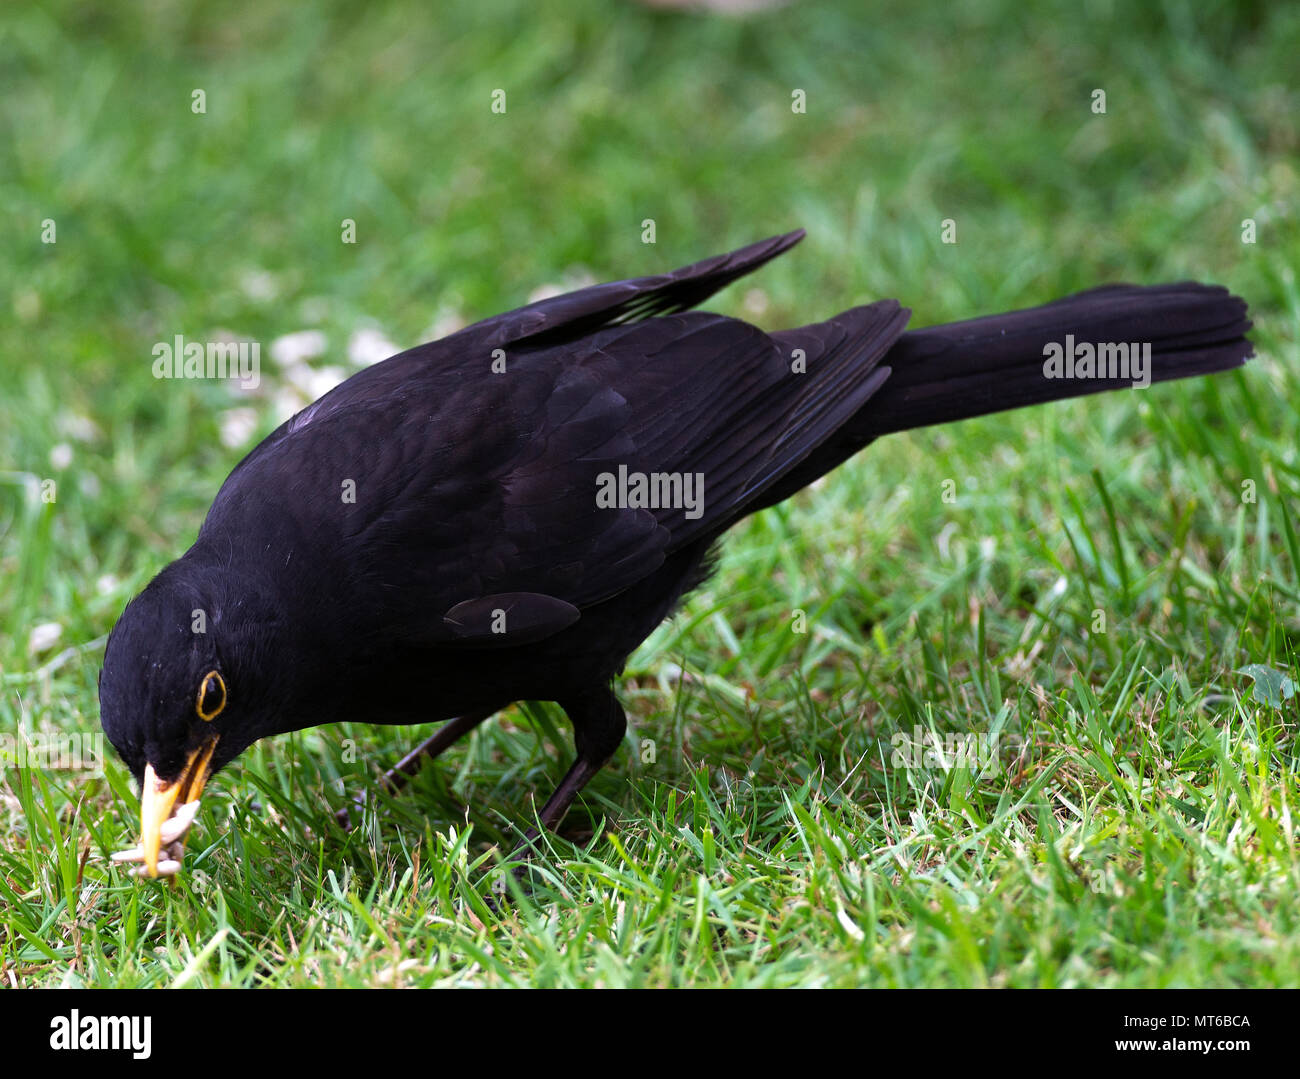 A Male Adult Blackbird Collecting Sunflower Heart Seeds to Feed a Juvenile on a Lawn in a Garden in Alsager Cheshire England United Kingdom UK Stock Photo